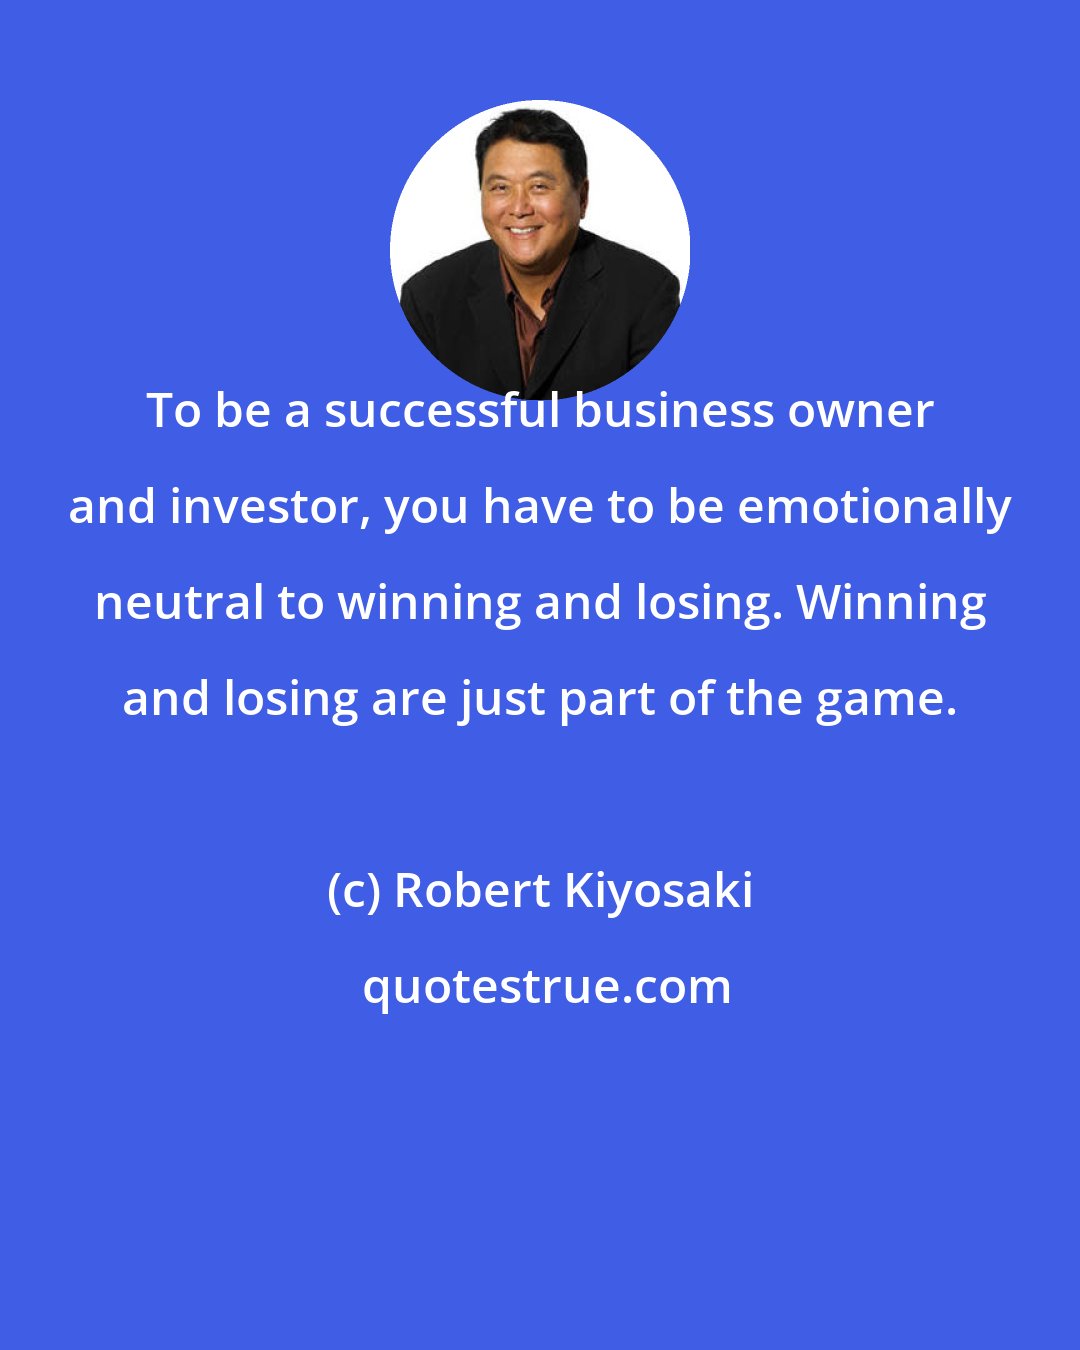 Robert Kiyosaki: To be a successful business owner and investor, you have to be emotionally neutral to winning and losing. Winning and losing are just part of the game.